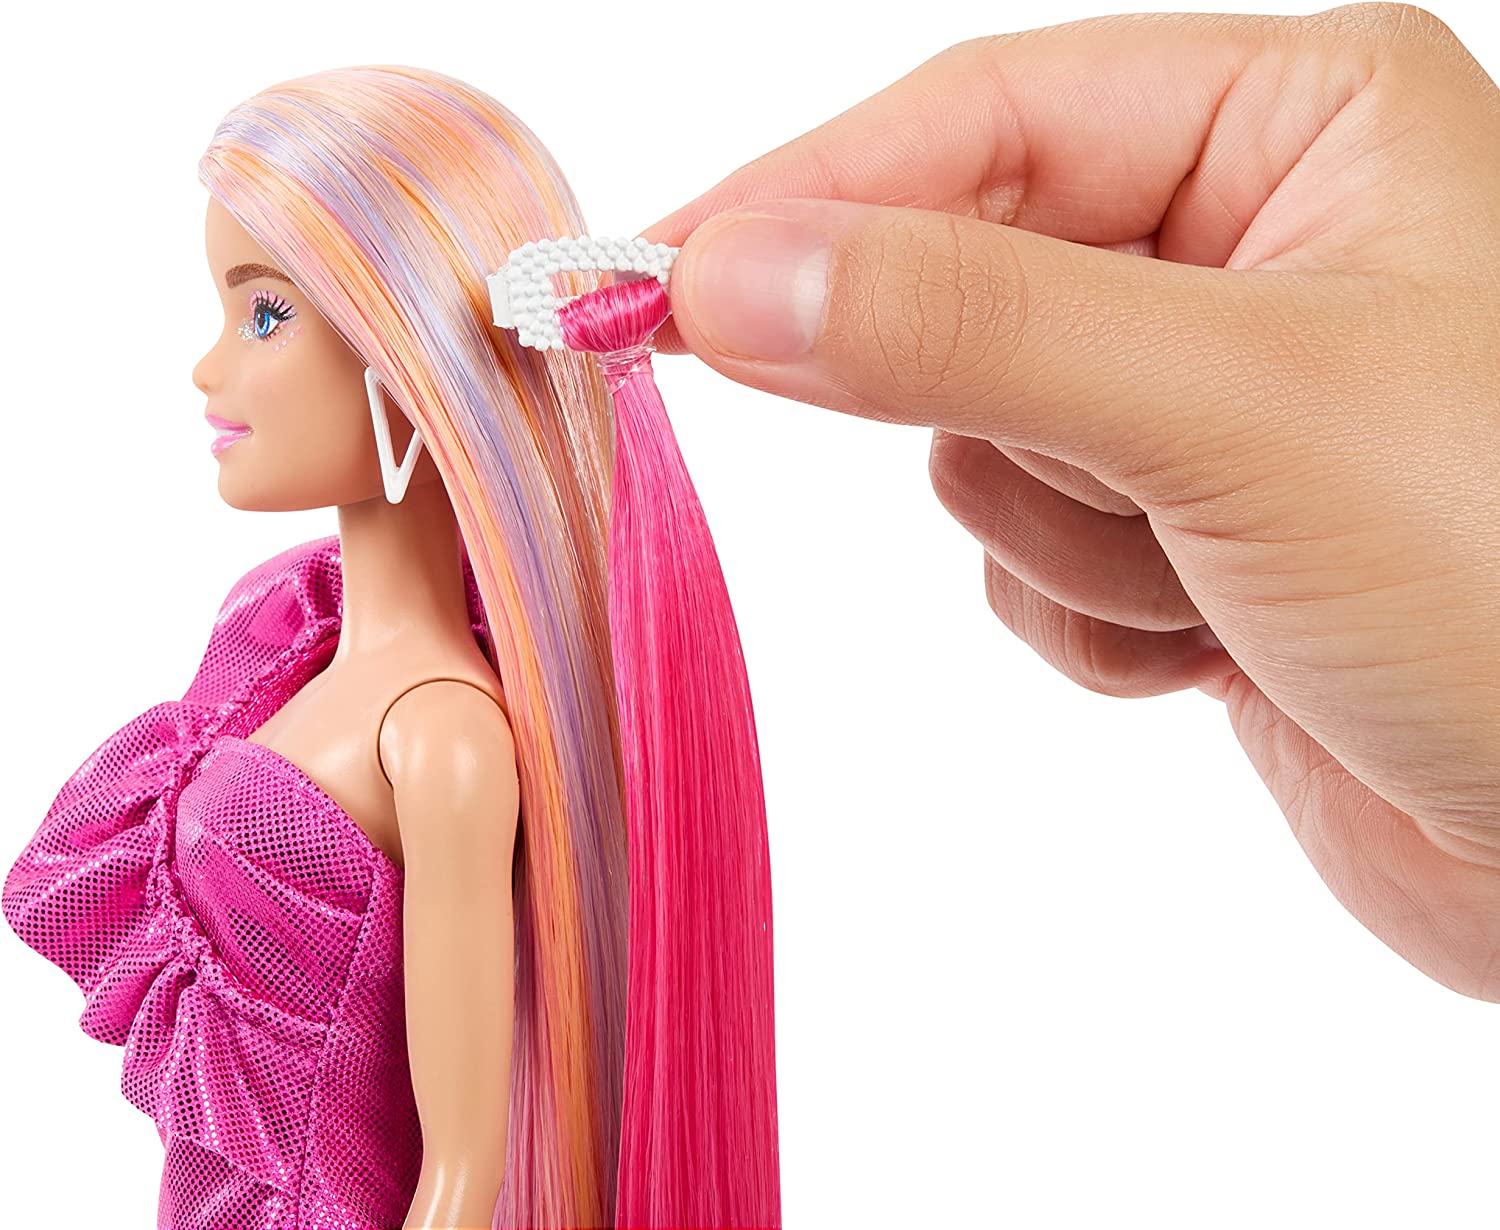 Theres a Nostalgic New Line of Barbie Totally Hair Dolls  SheKnows